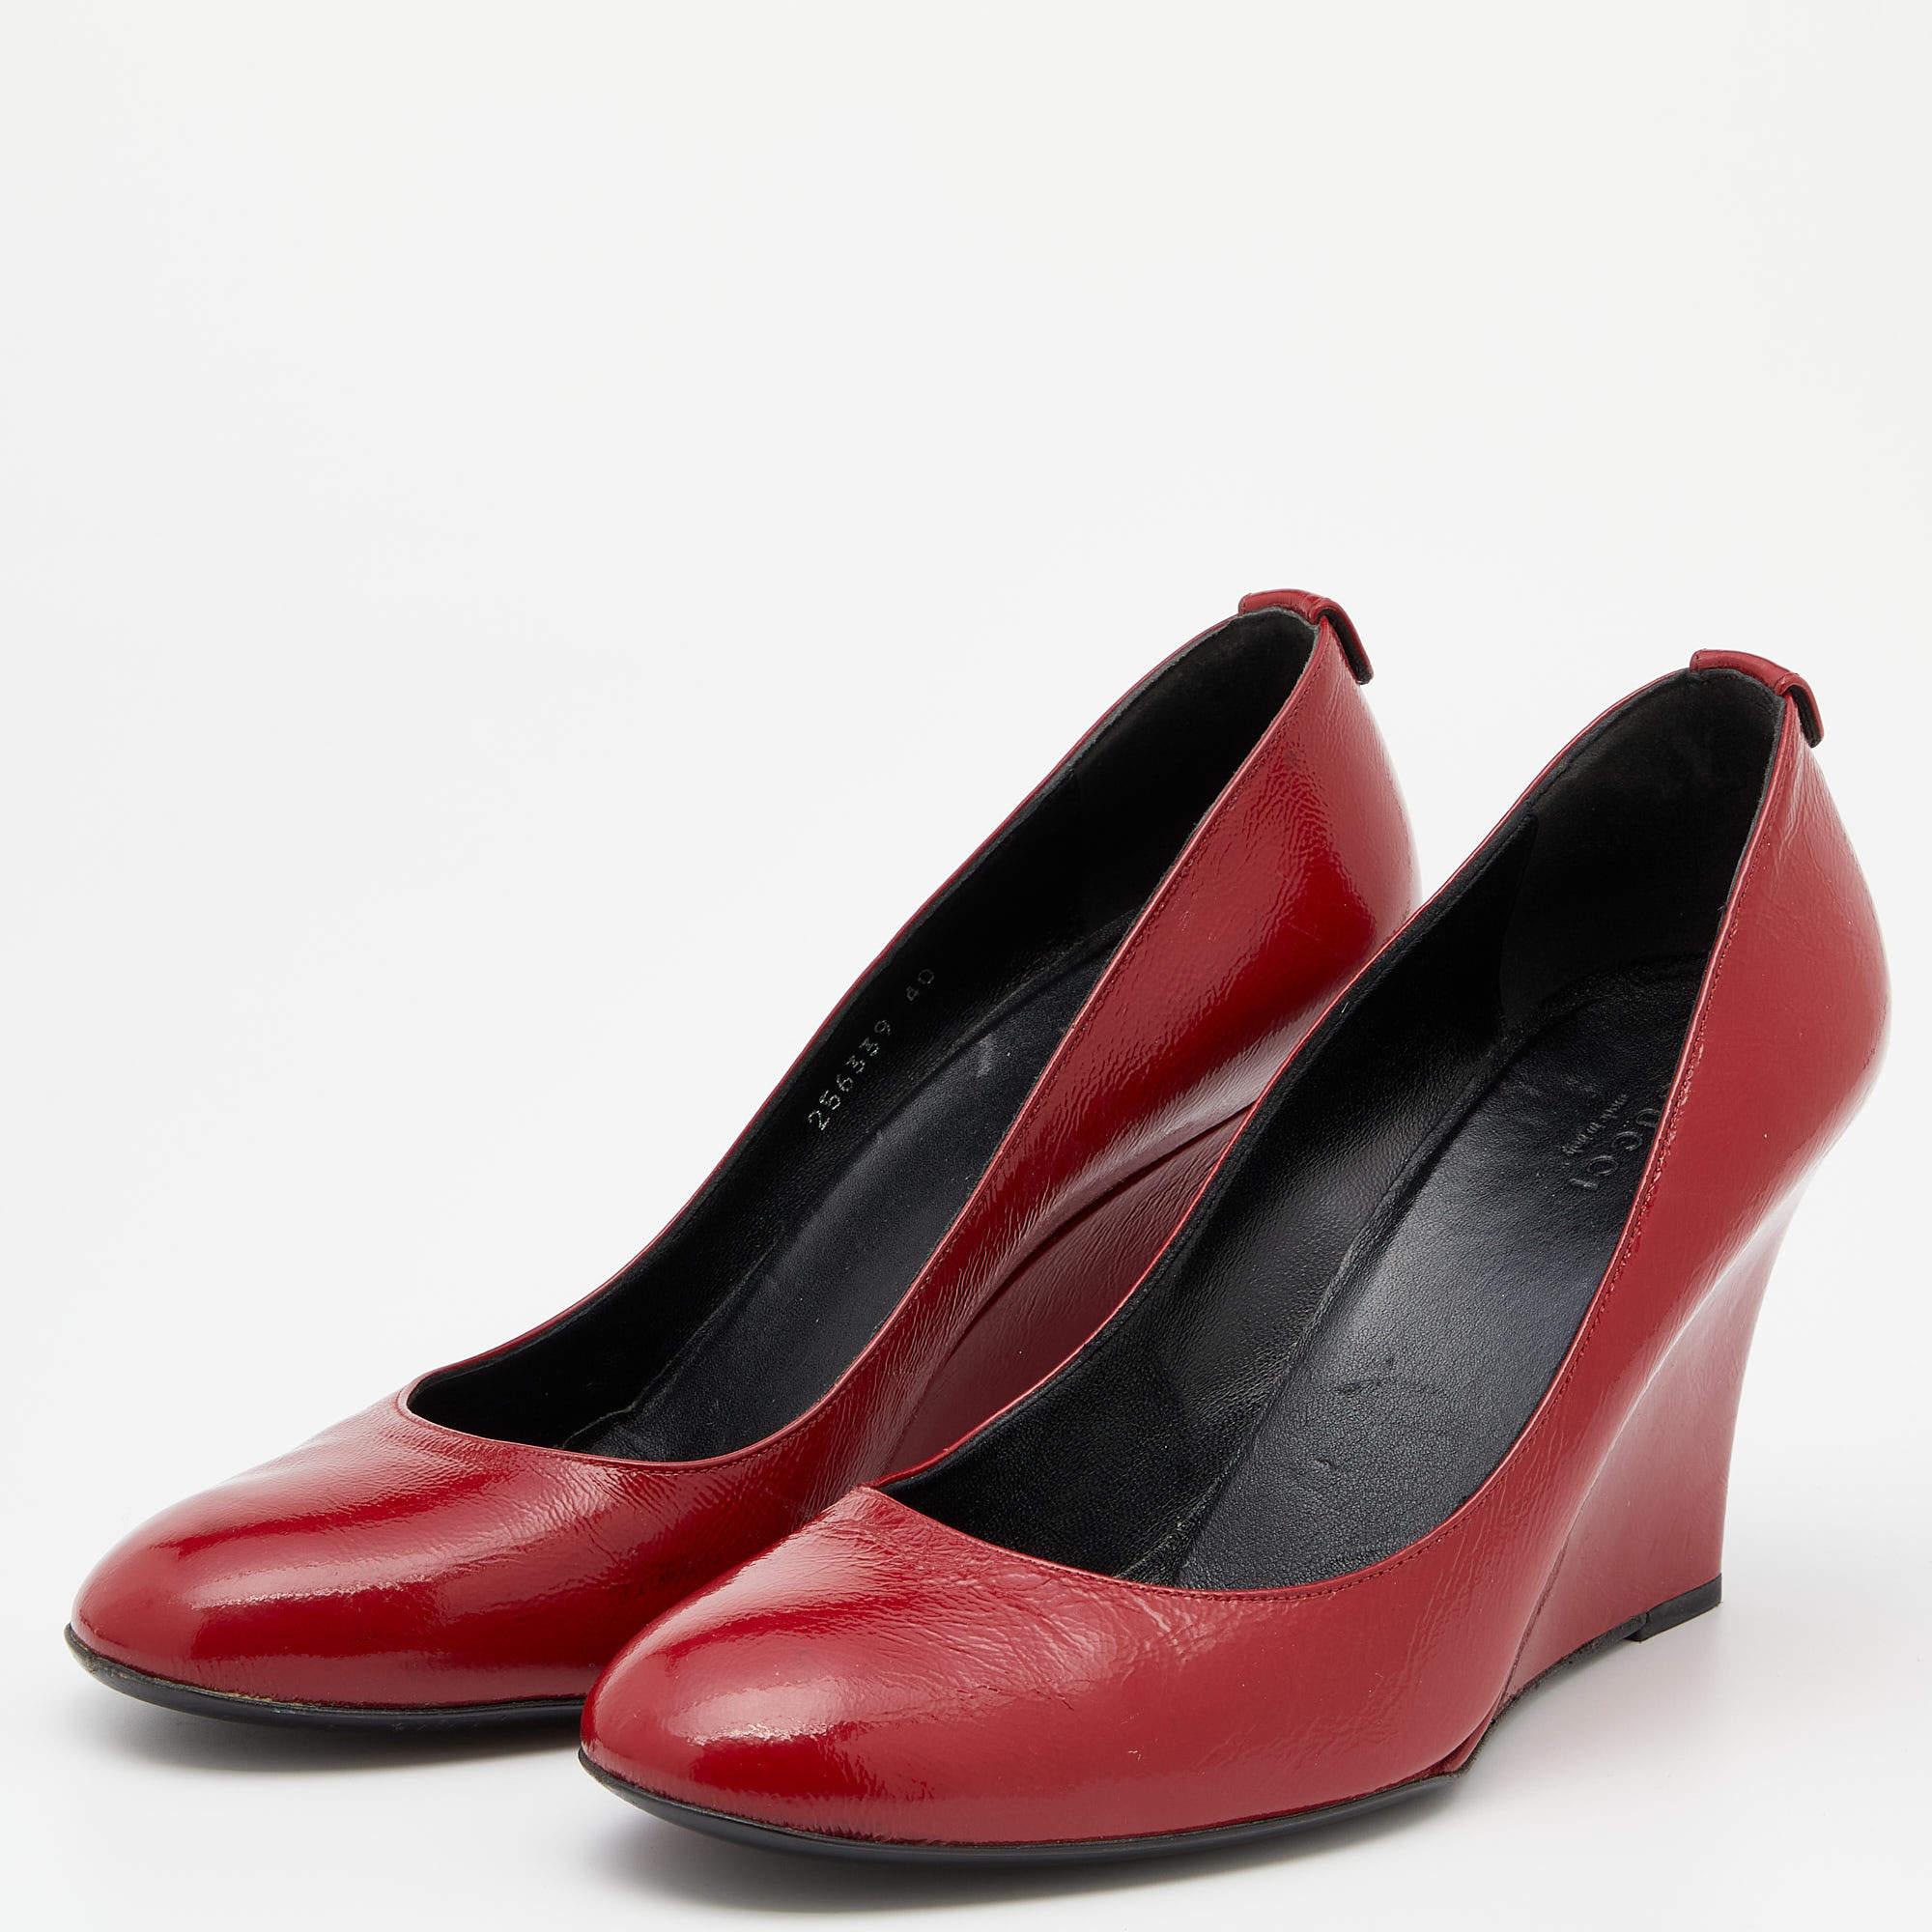 There are some shoes that stand the test of time and fashion cycles, these timeless Gucci pumps are the ones. Crafted from patent leather in a versatile red shade, they are designed with sleek cuts, round-toes, and wedge heels.

